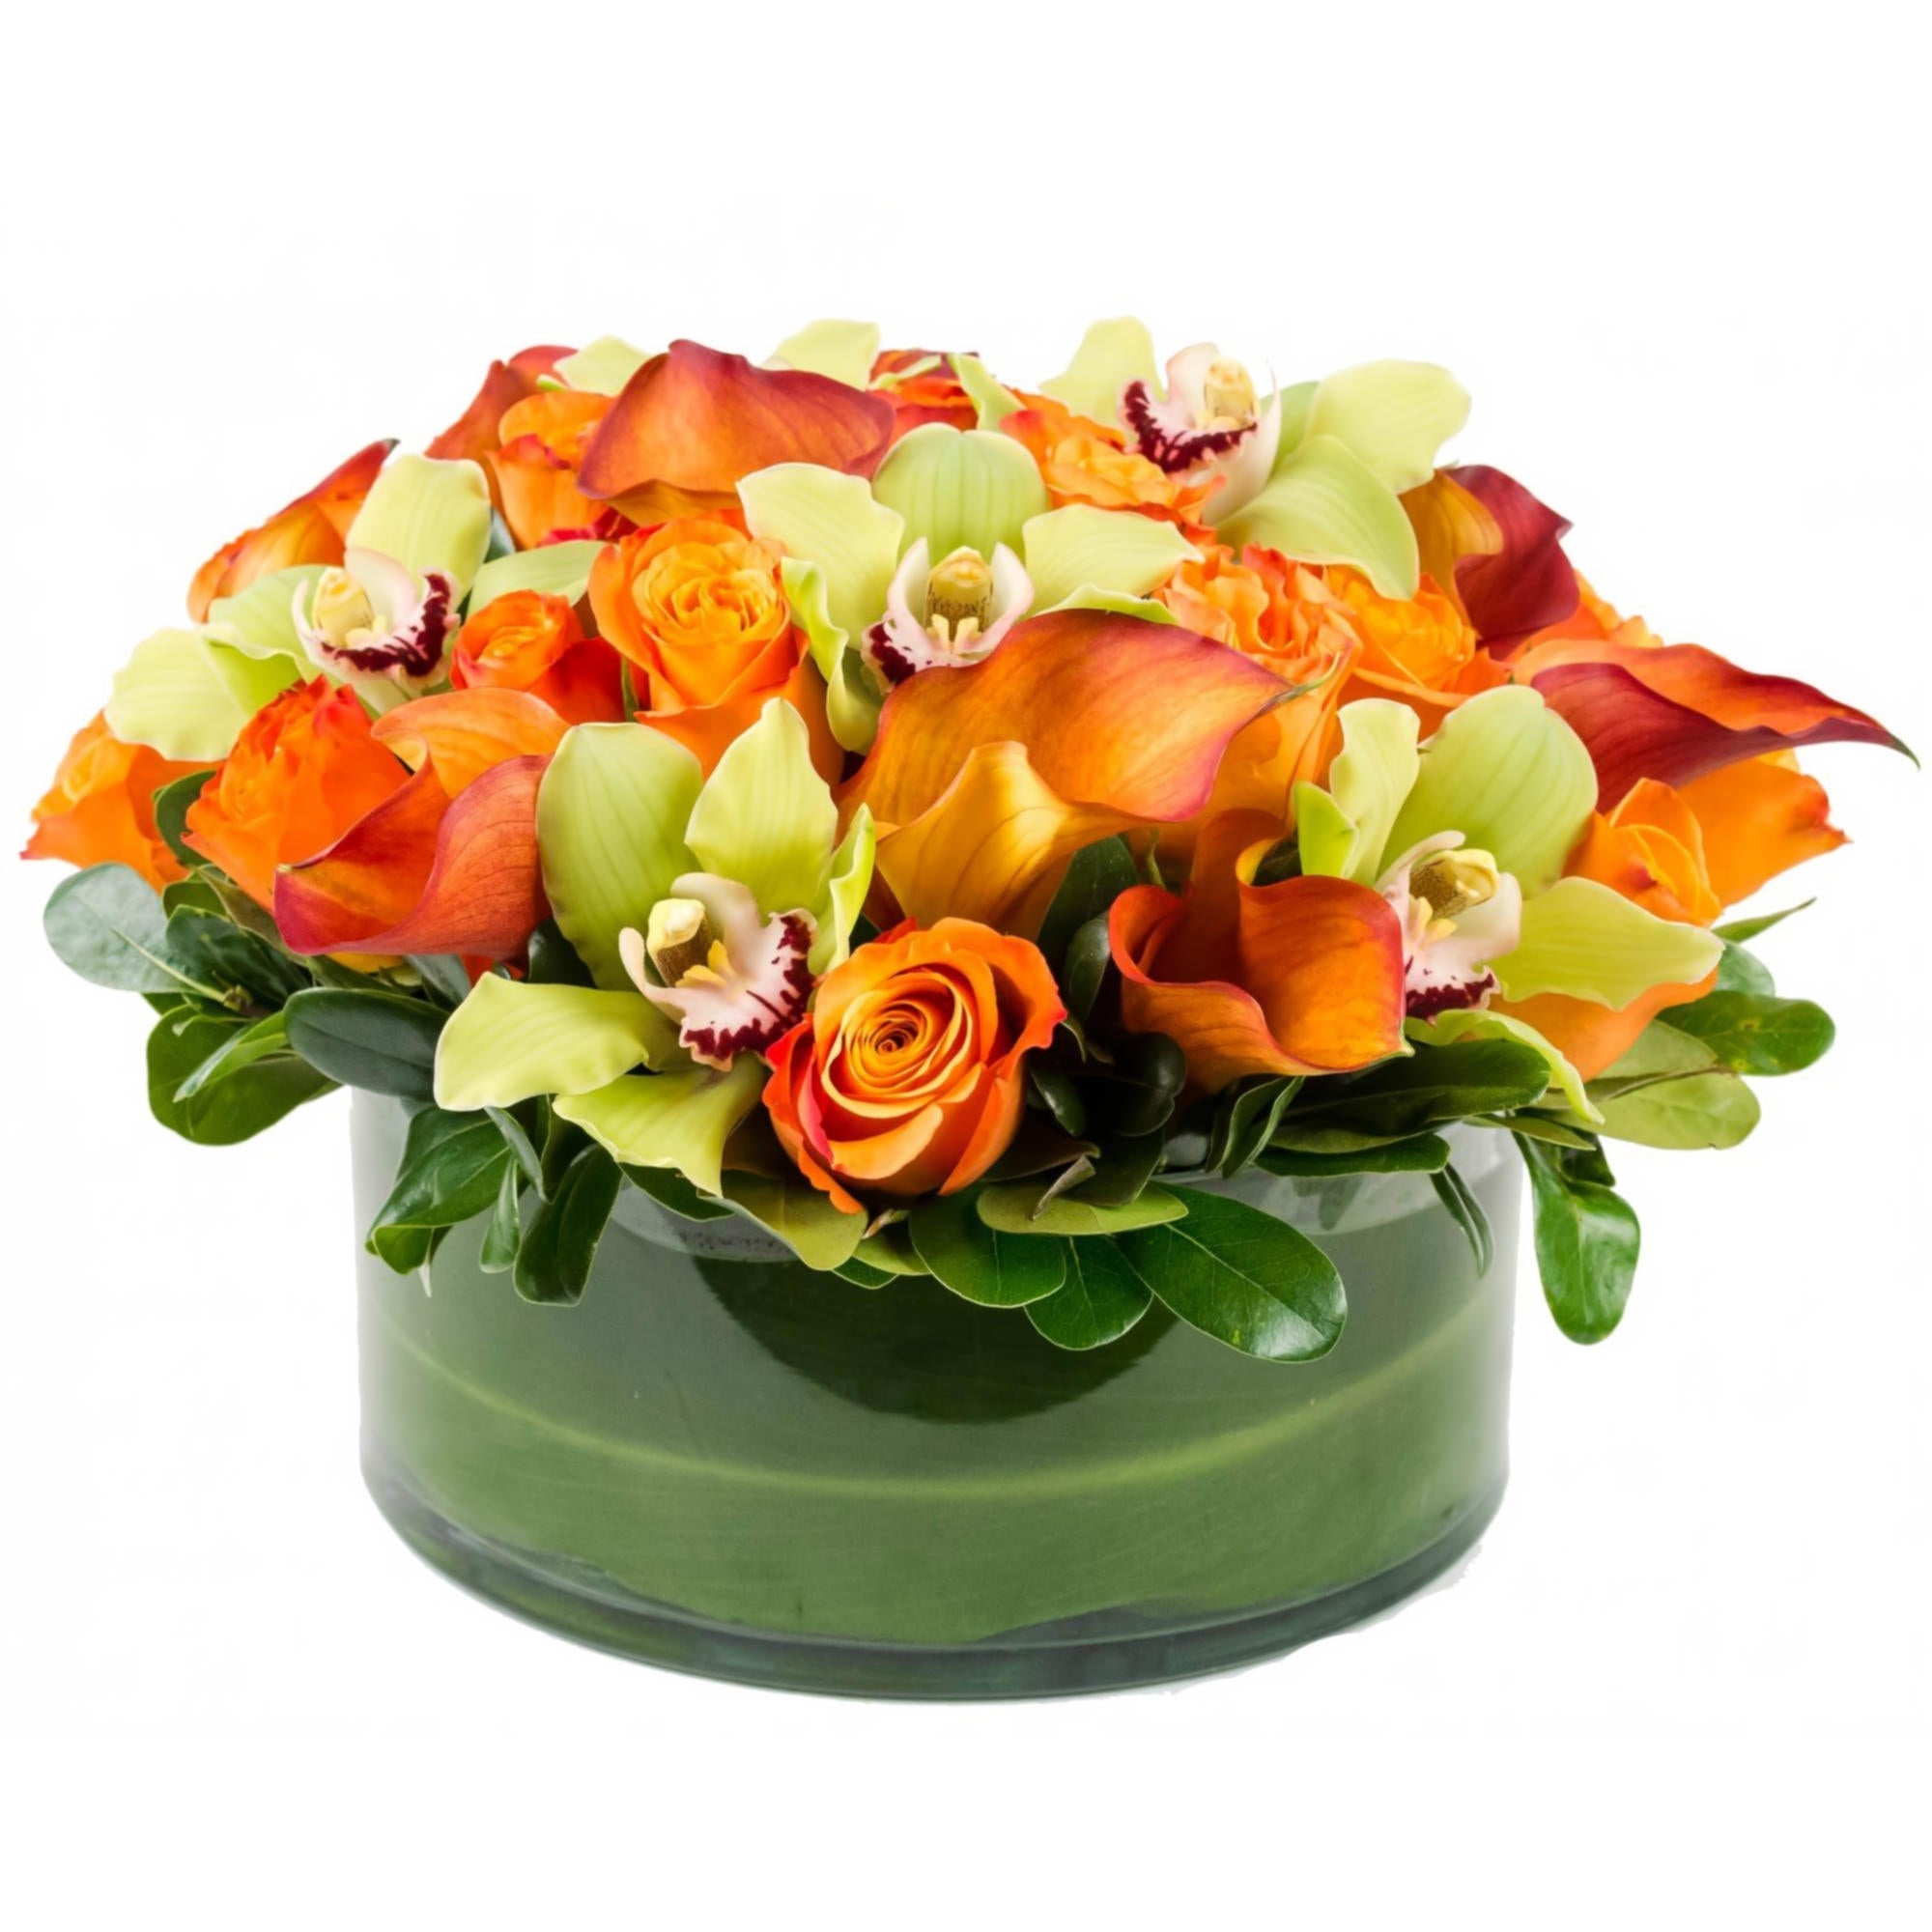 Orange You Special Floral Arrangement by Queens Flower Delivery features orange roses and green cymbidium orchids in a cylinder vase.